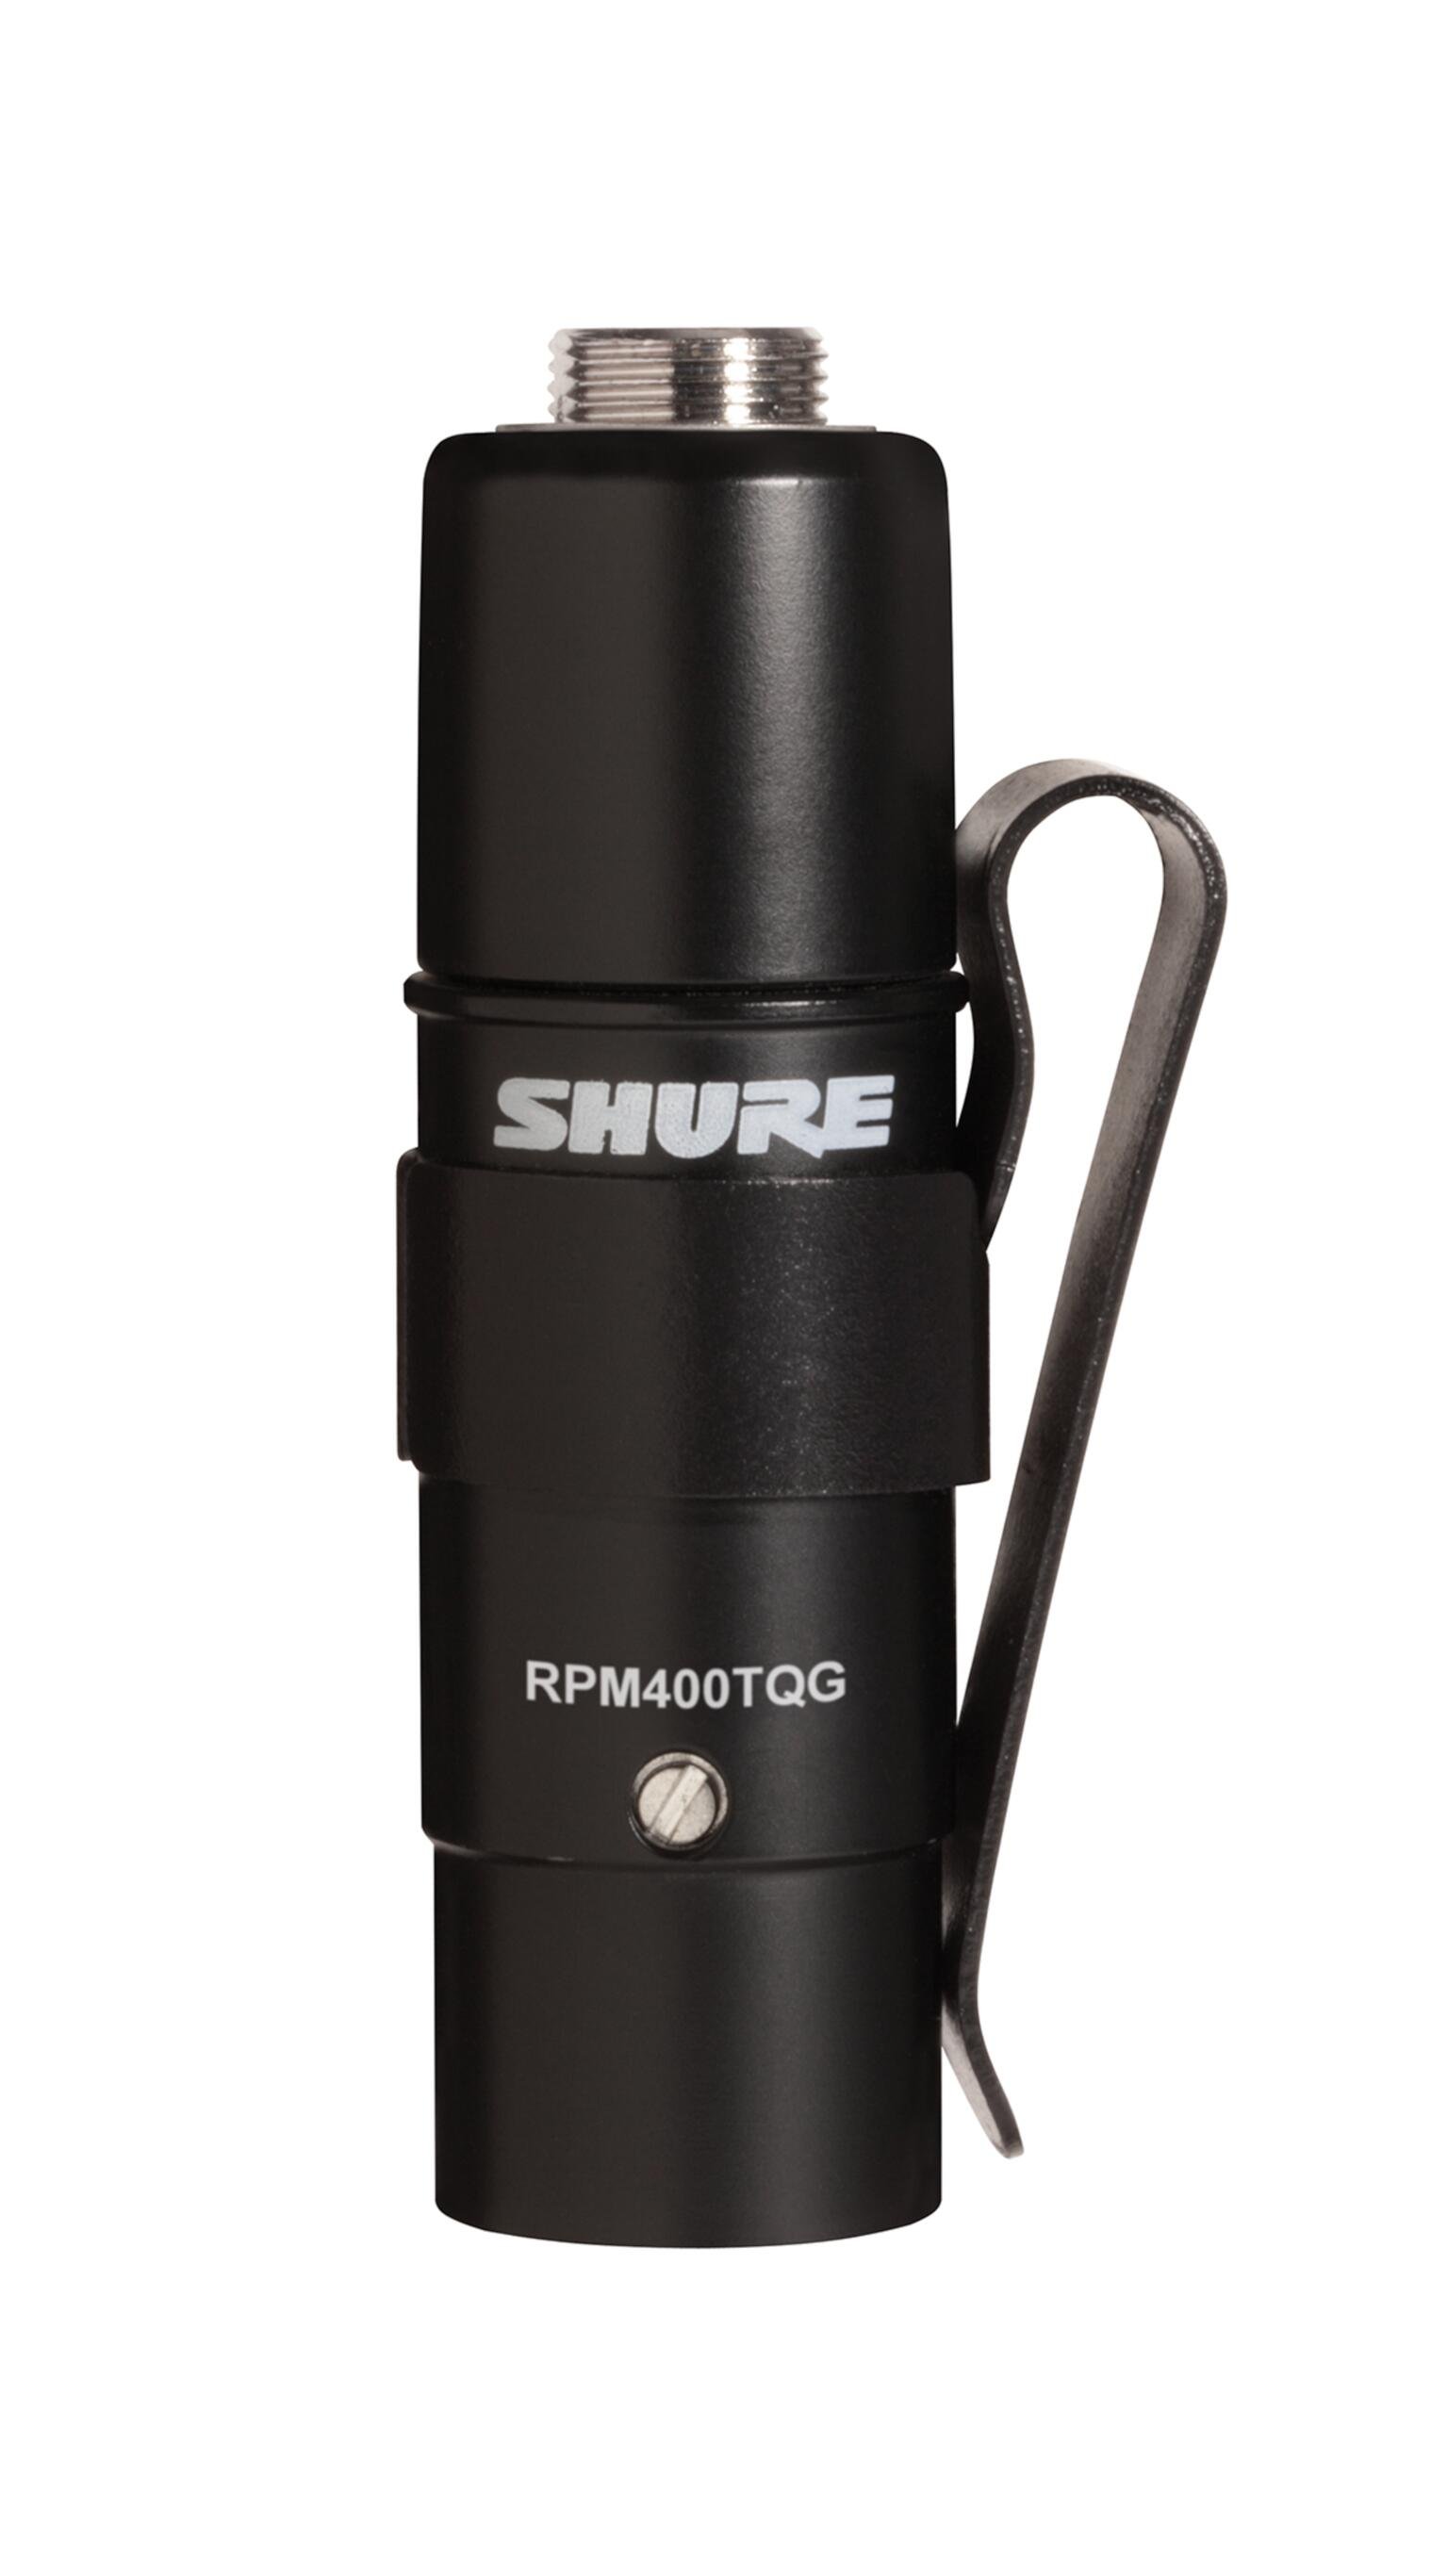 Photos - Cable (video, audio, USB) Shure RPM400 Wired XLR Preamplifier with Beltclip - TQG to XLR 